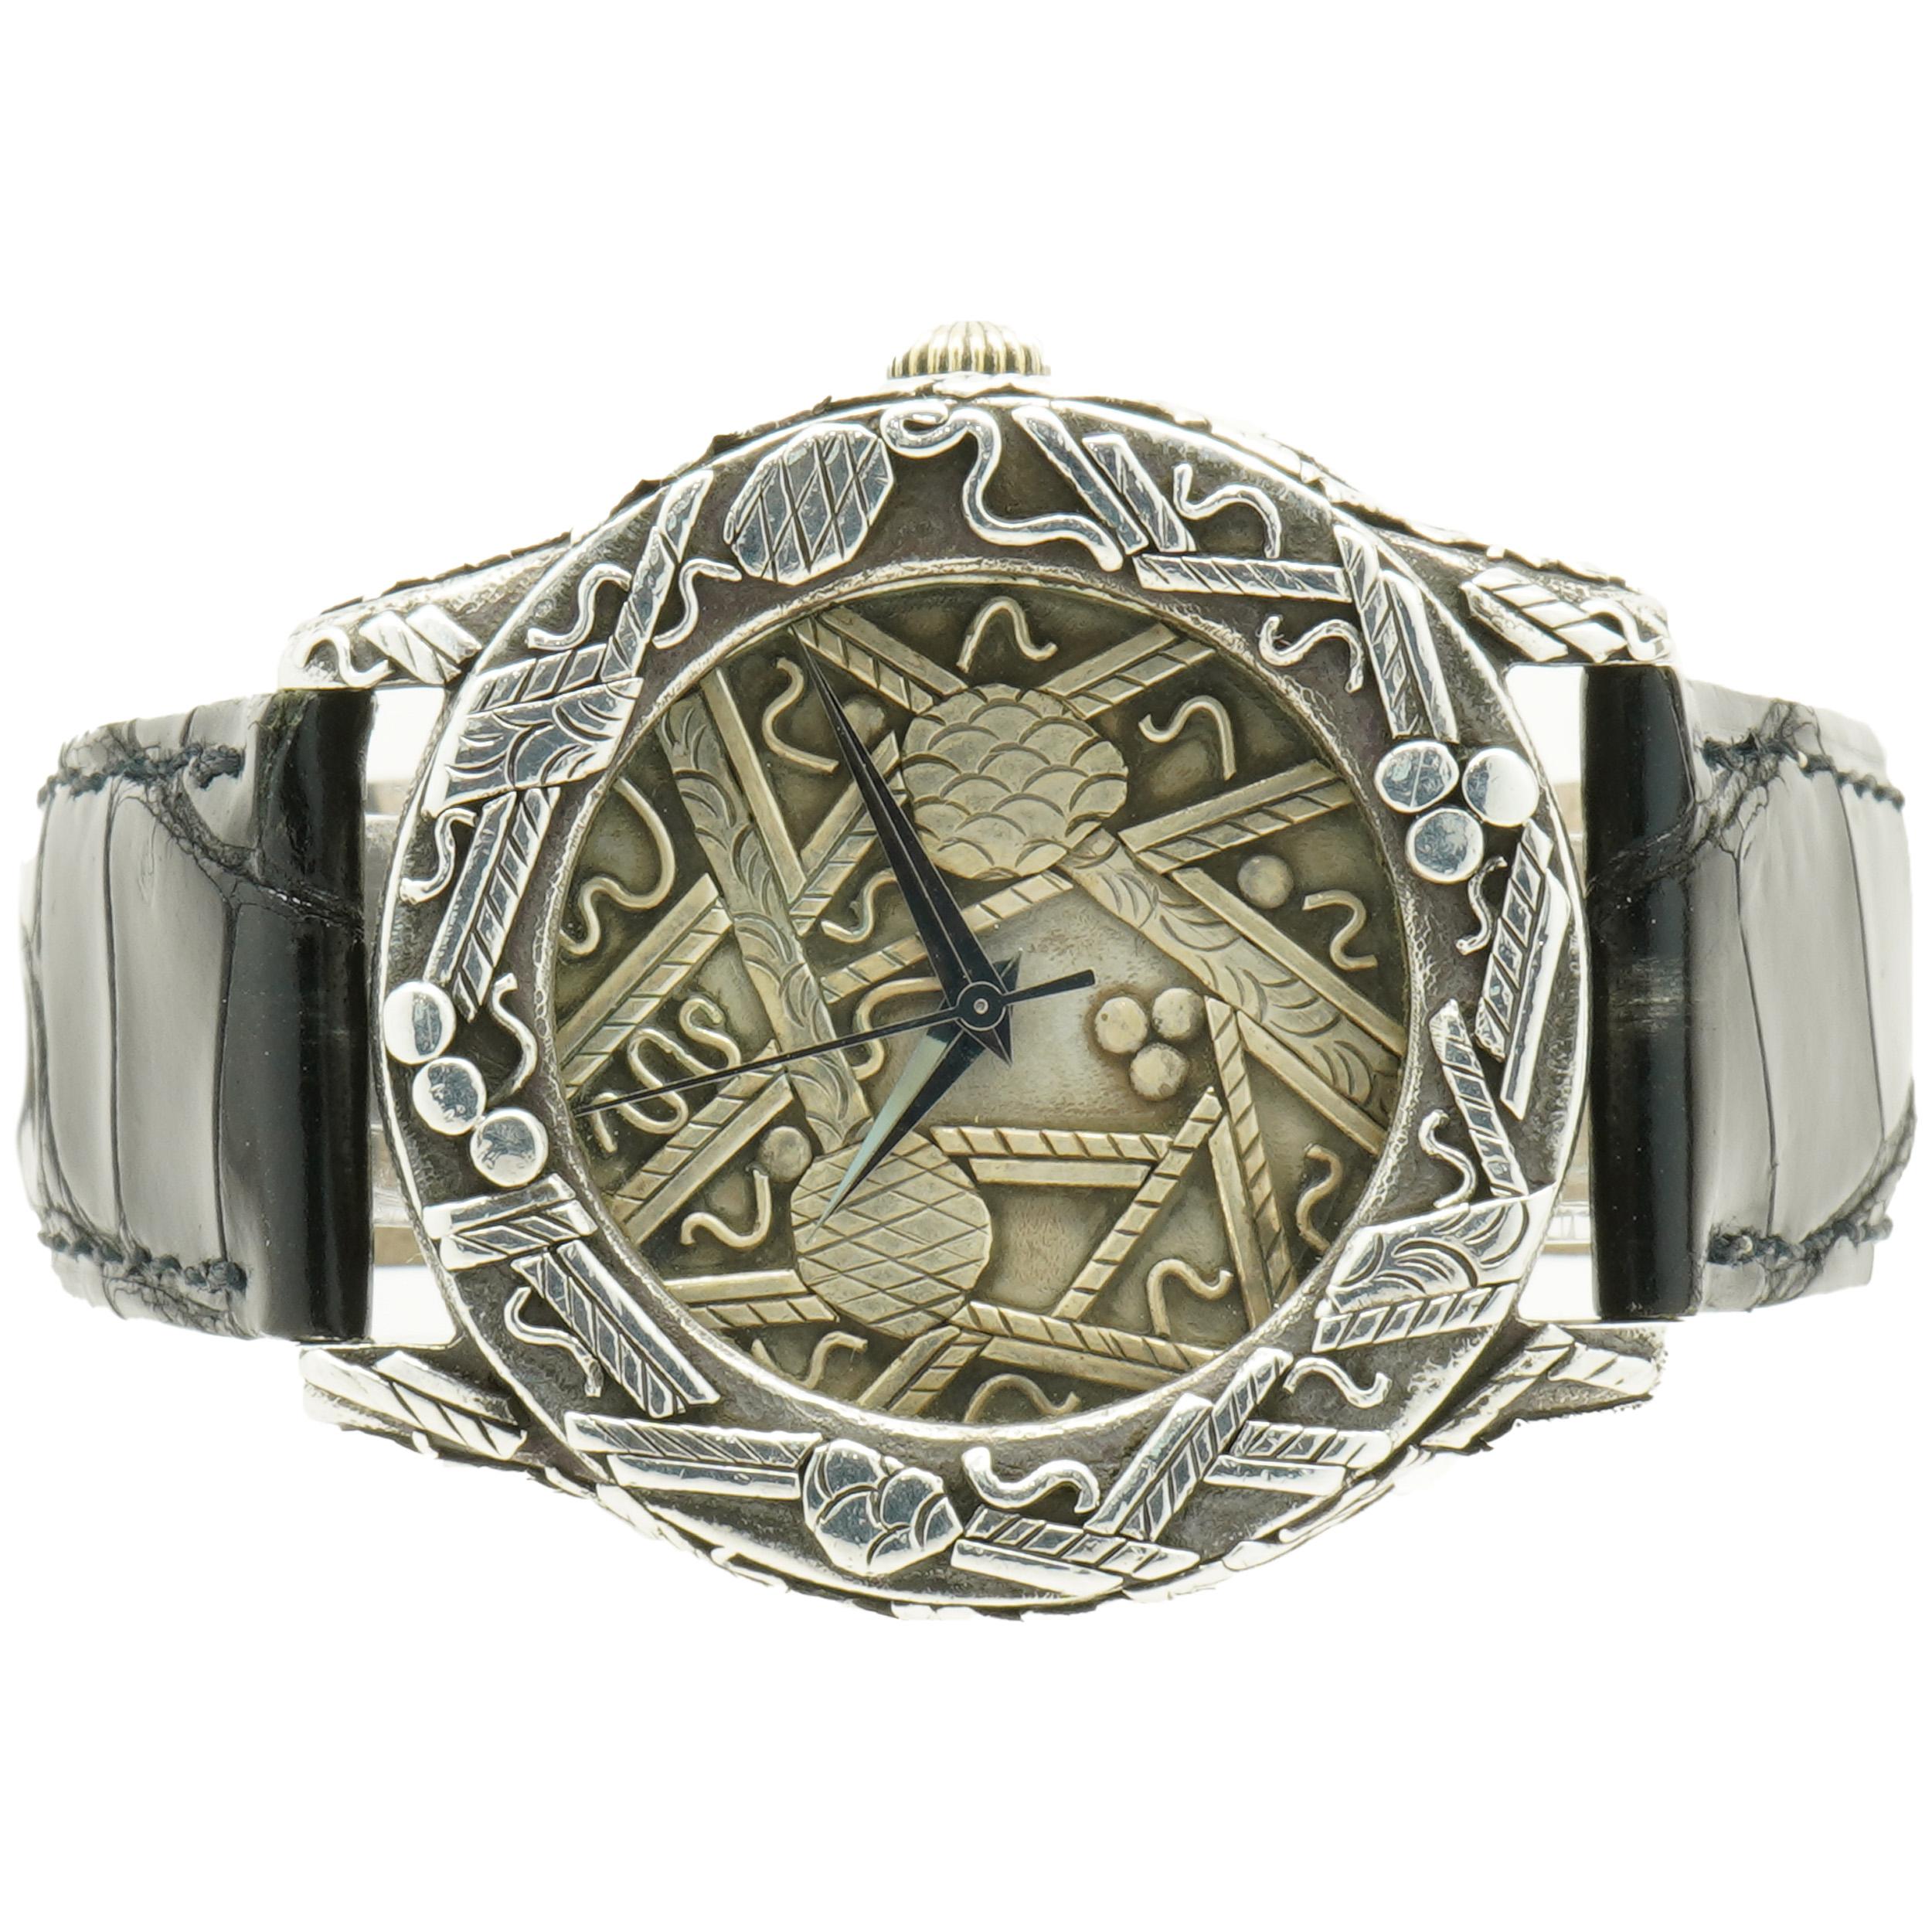 Designer: John Hardy
Material: sterling silver / leather strap and buckle
Dimensions: watch will fit up to a 7.5-inch wrist
Reference # 4874
No box or papers included